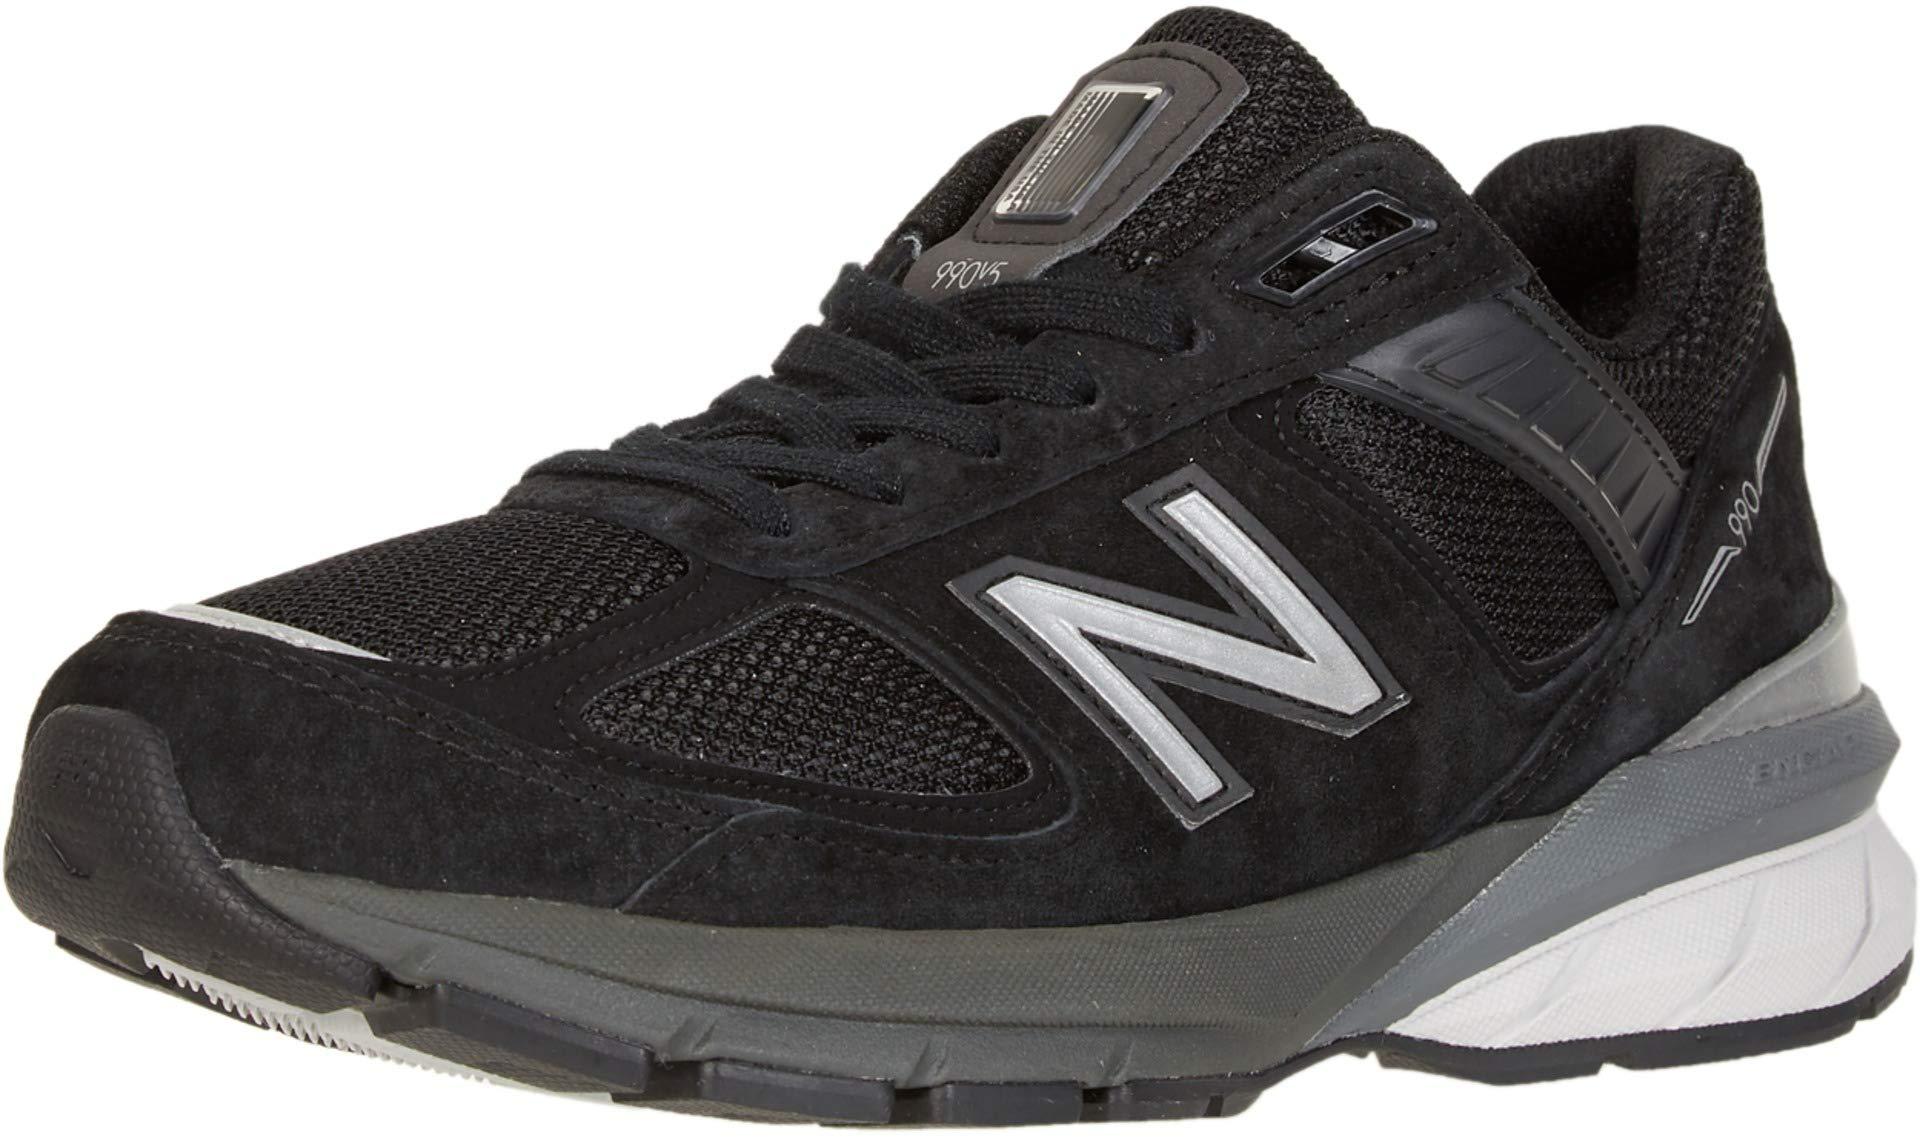 New Balance Leather 990v5 in Black/Silver (Black) - Lyst